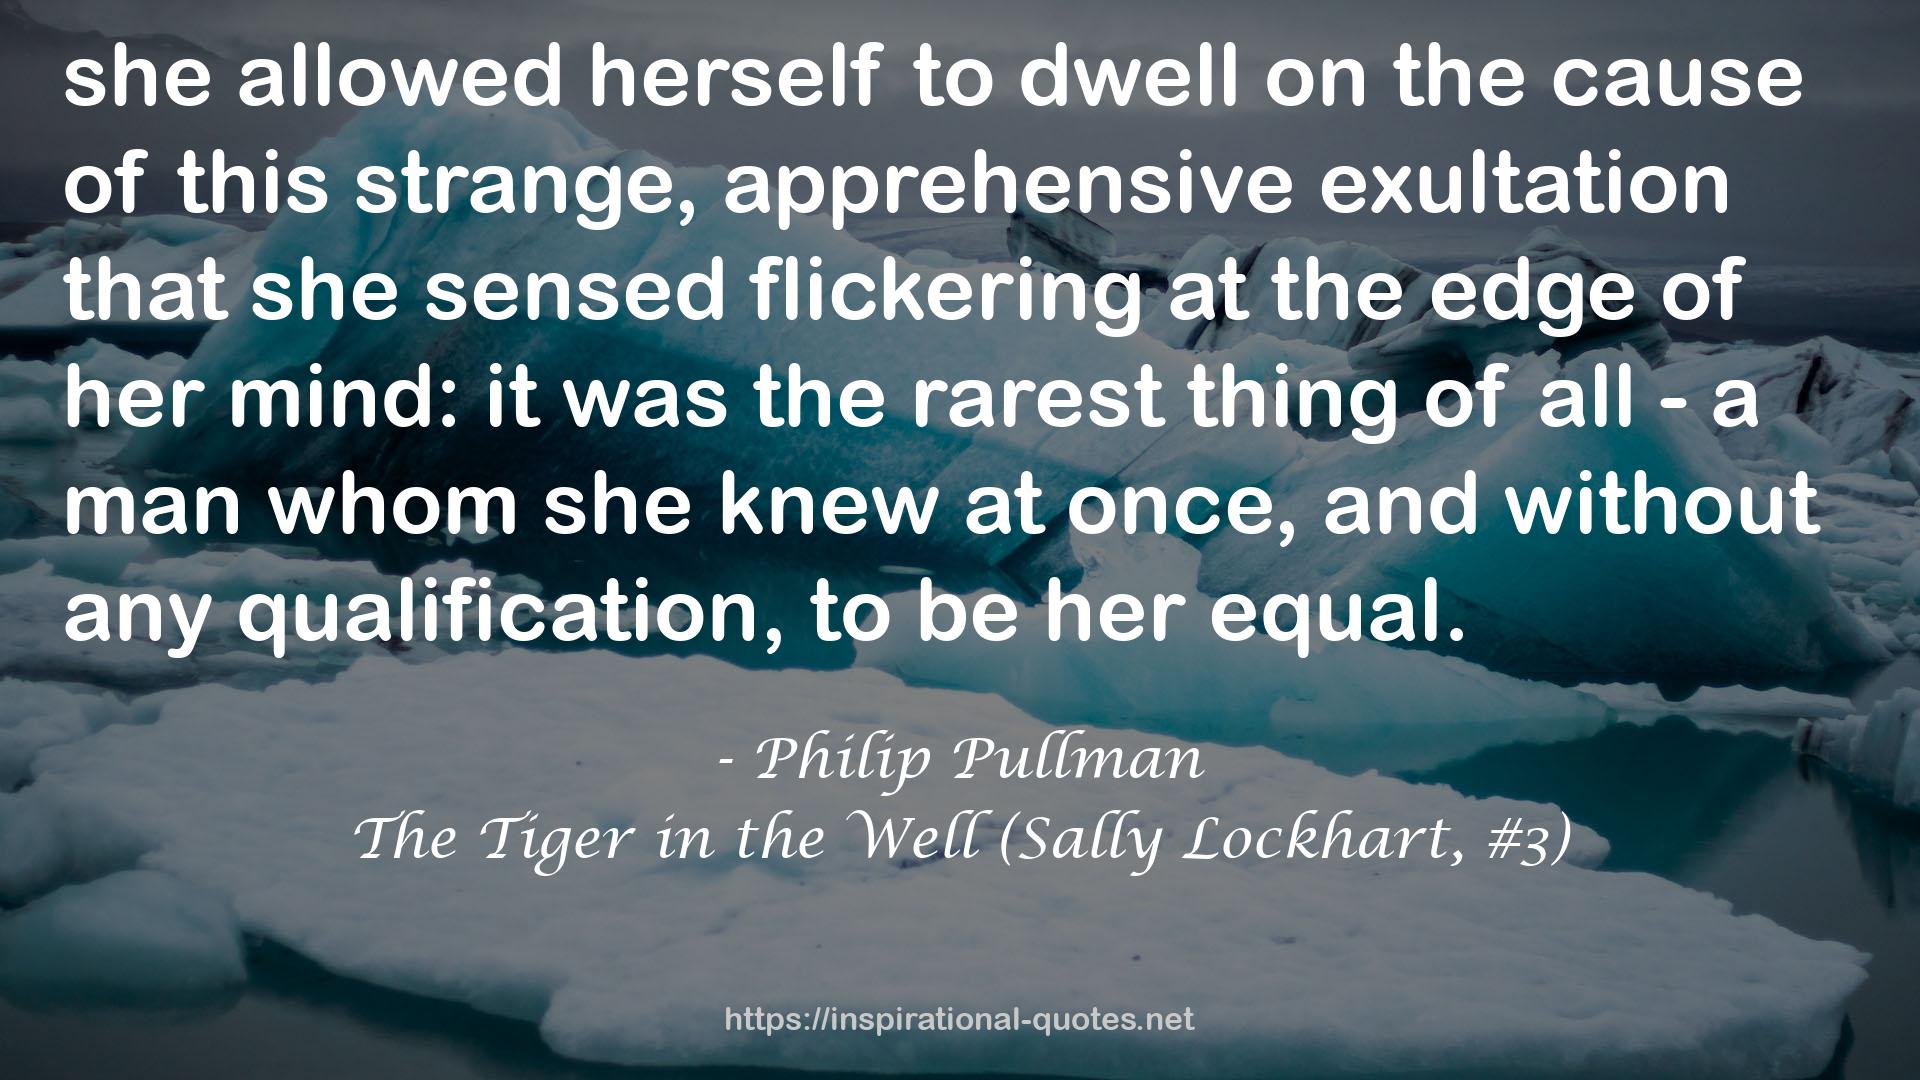 The Tiger in the Well (Sally Lockhart, #3) QUOTES